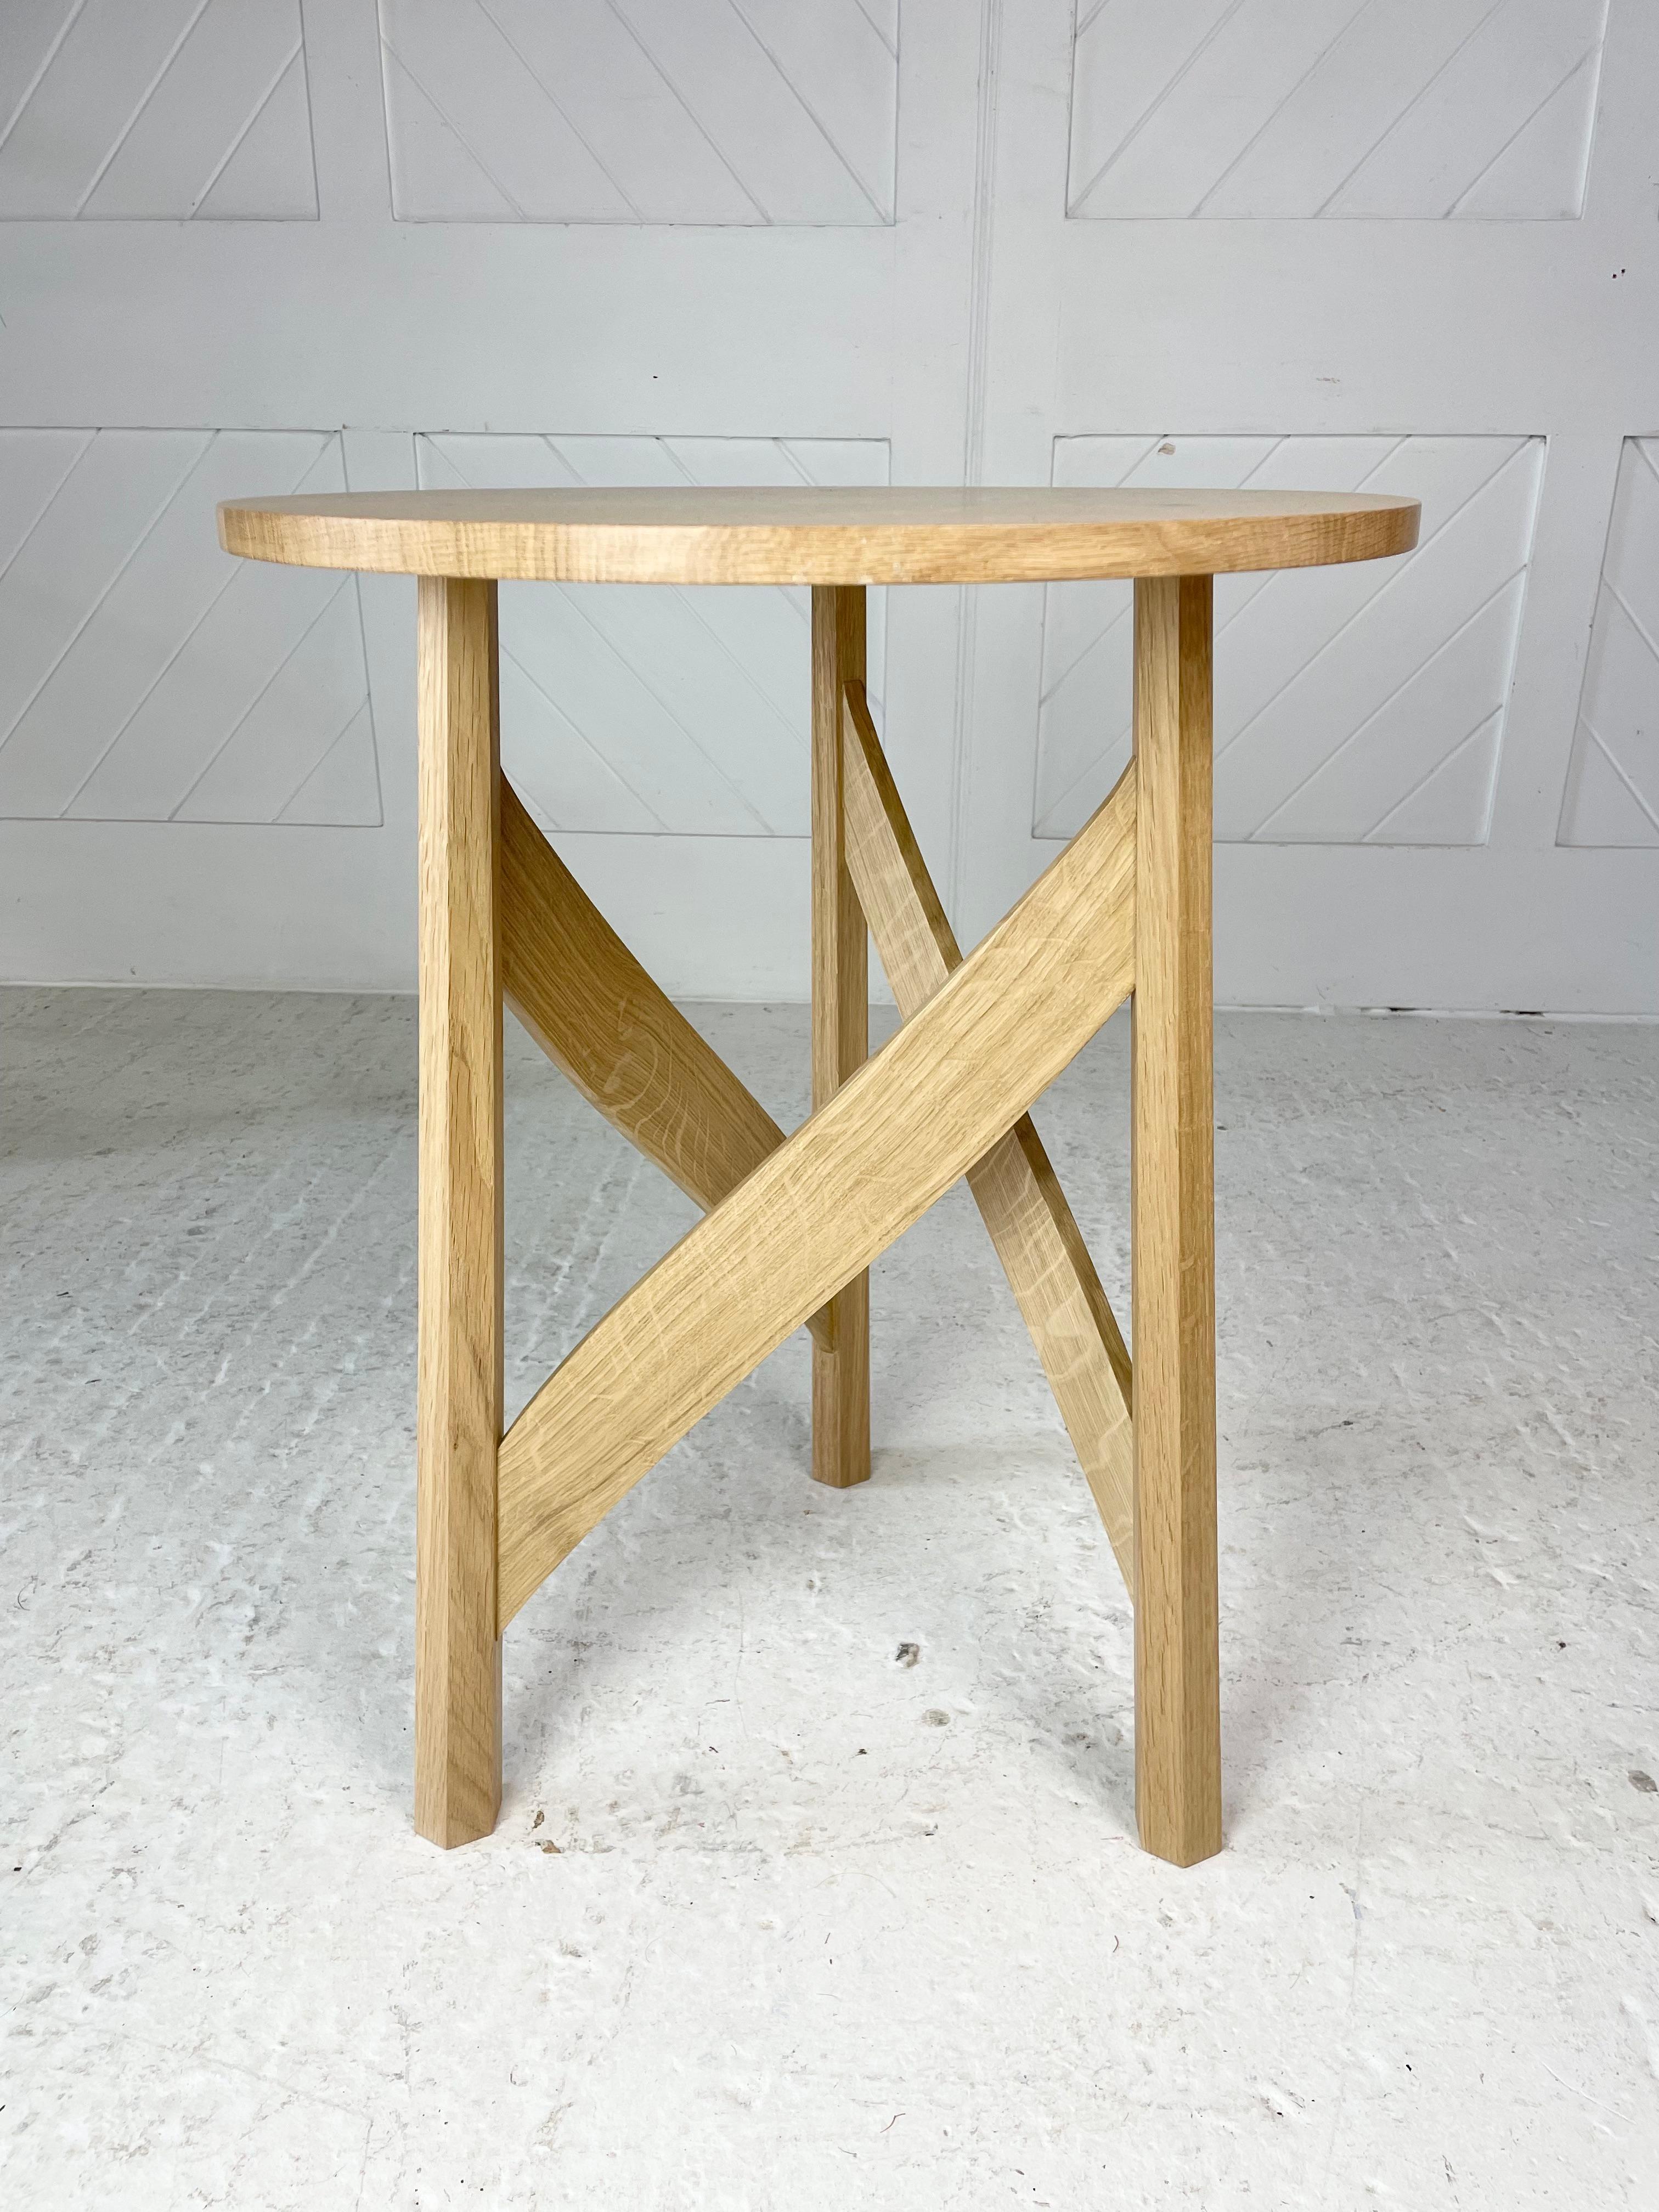 Hand made circular side-table in quarter sawn English Oak with three through jointed splayed flared octagonal legs united by shaped rails, two plank oak quarter-sawn top with ebony detail.

This table is based on a design by M.H. Bailie Scott for JP